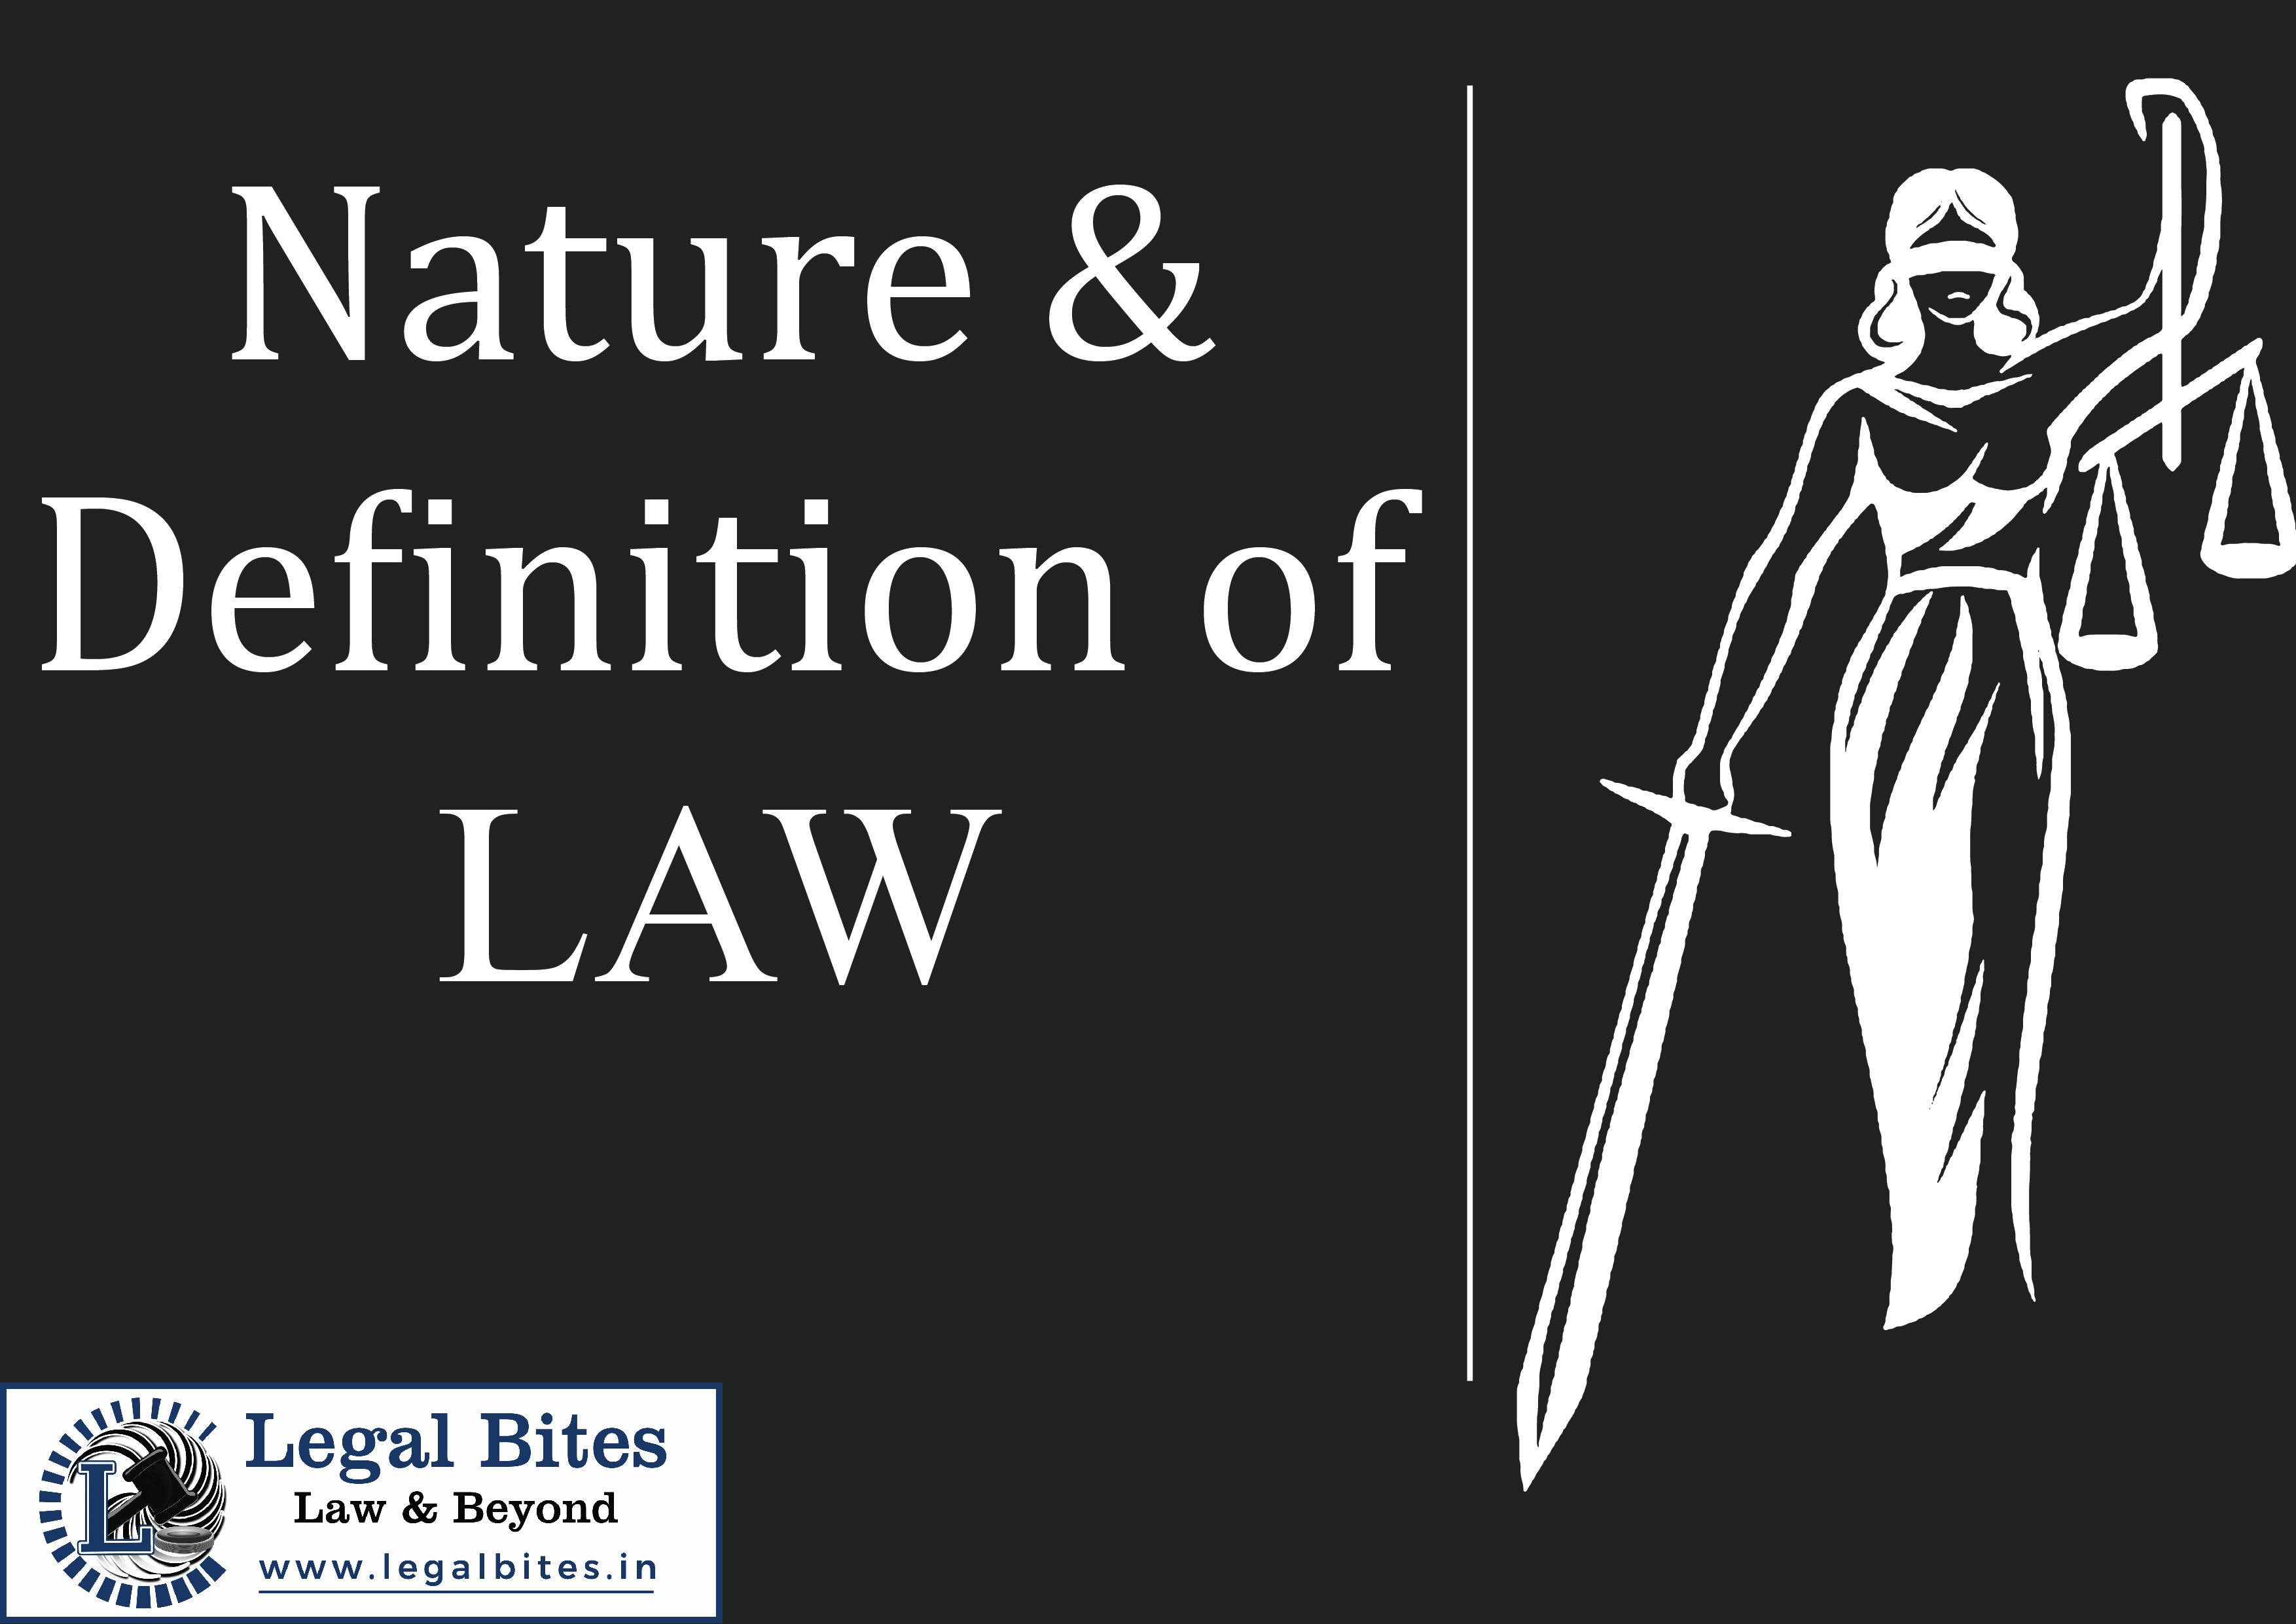 Nature & Definition of Law